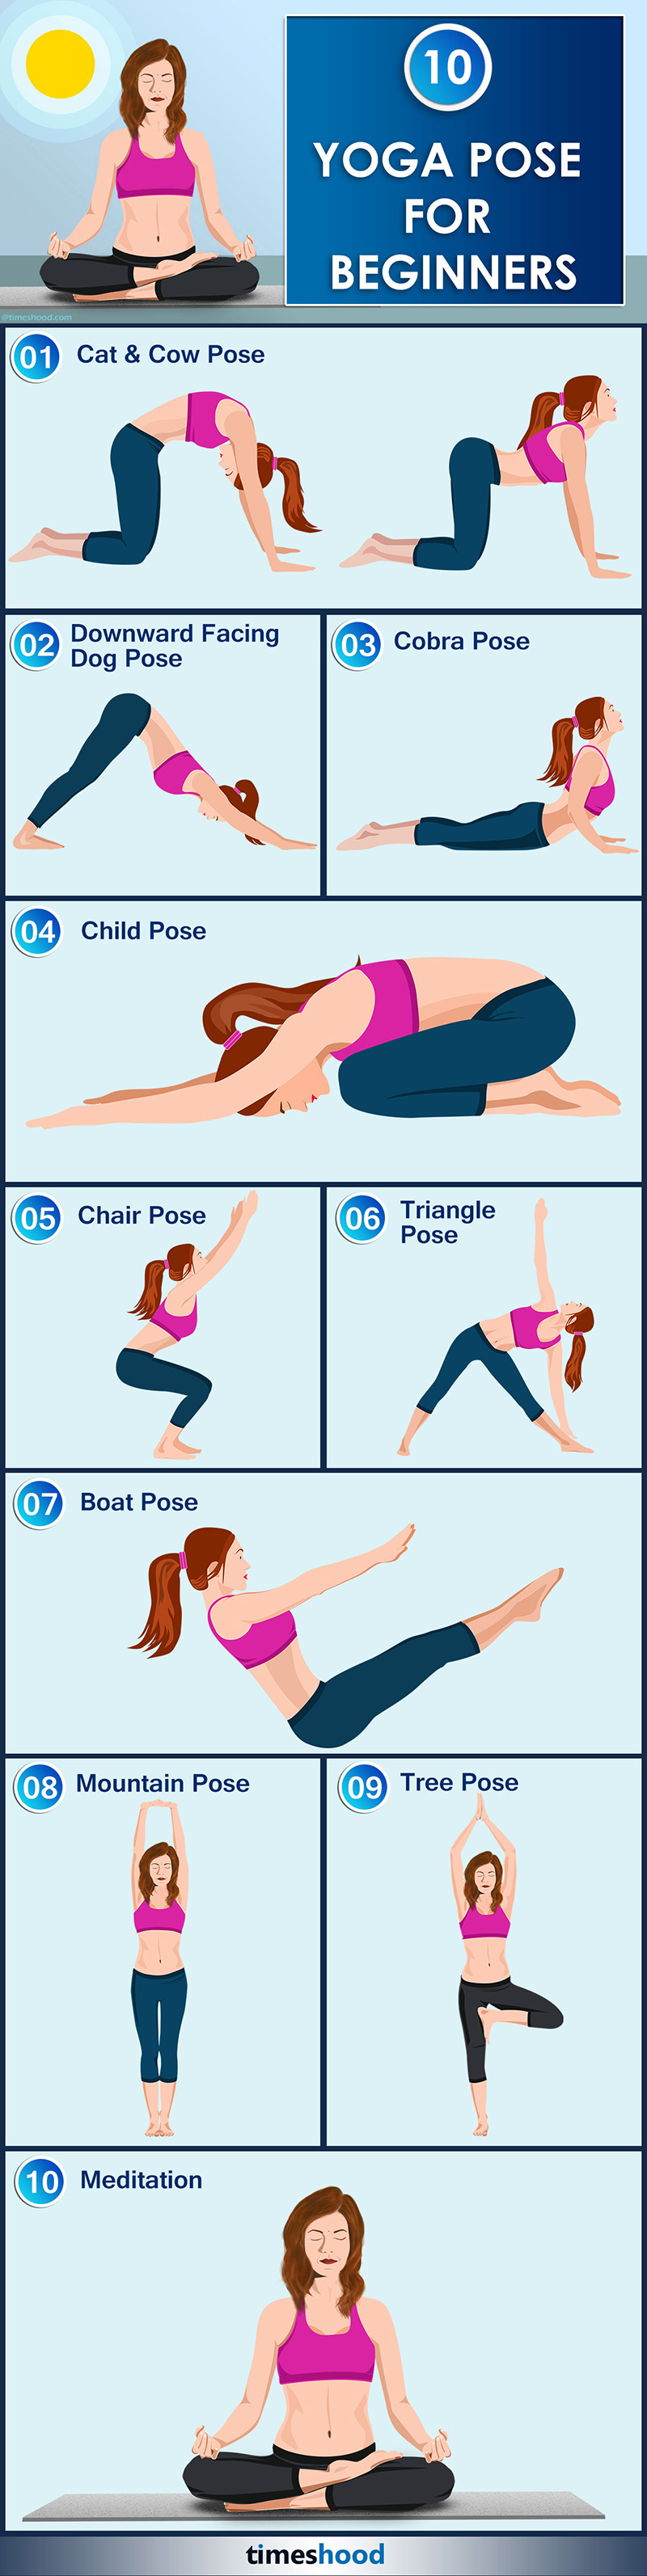 Yoga Pose for beginners - 10 Simple yoga pose for beginners with benefits [Infographic]. 10 Morning Yoga Workout for Women. Flat Belly Yoga Workout | Fat Burning Yoga Poses | Yoga for Positivity